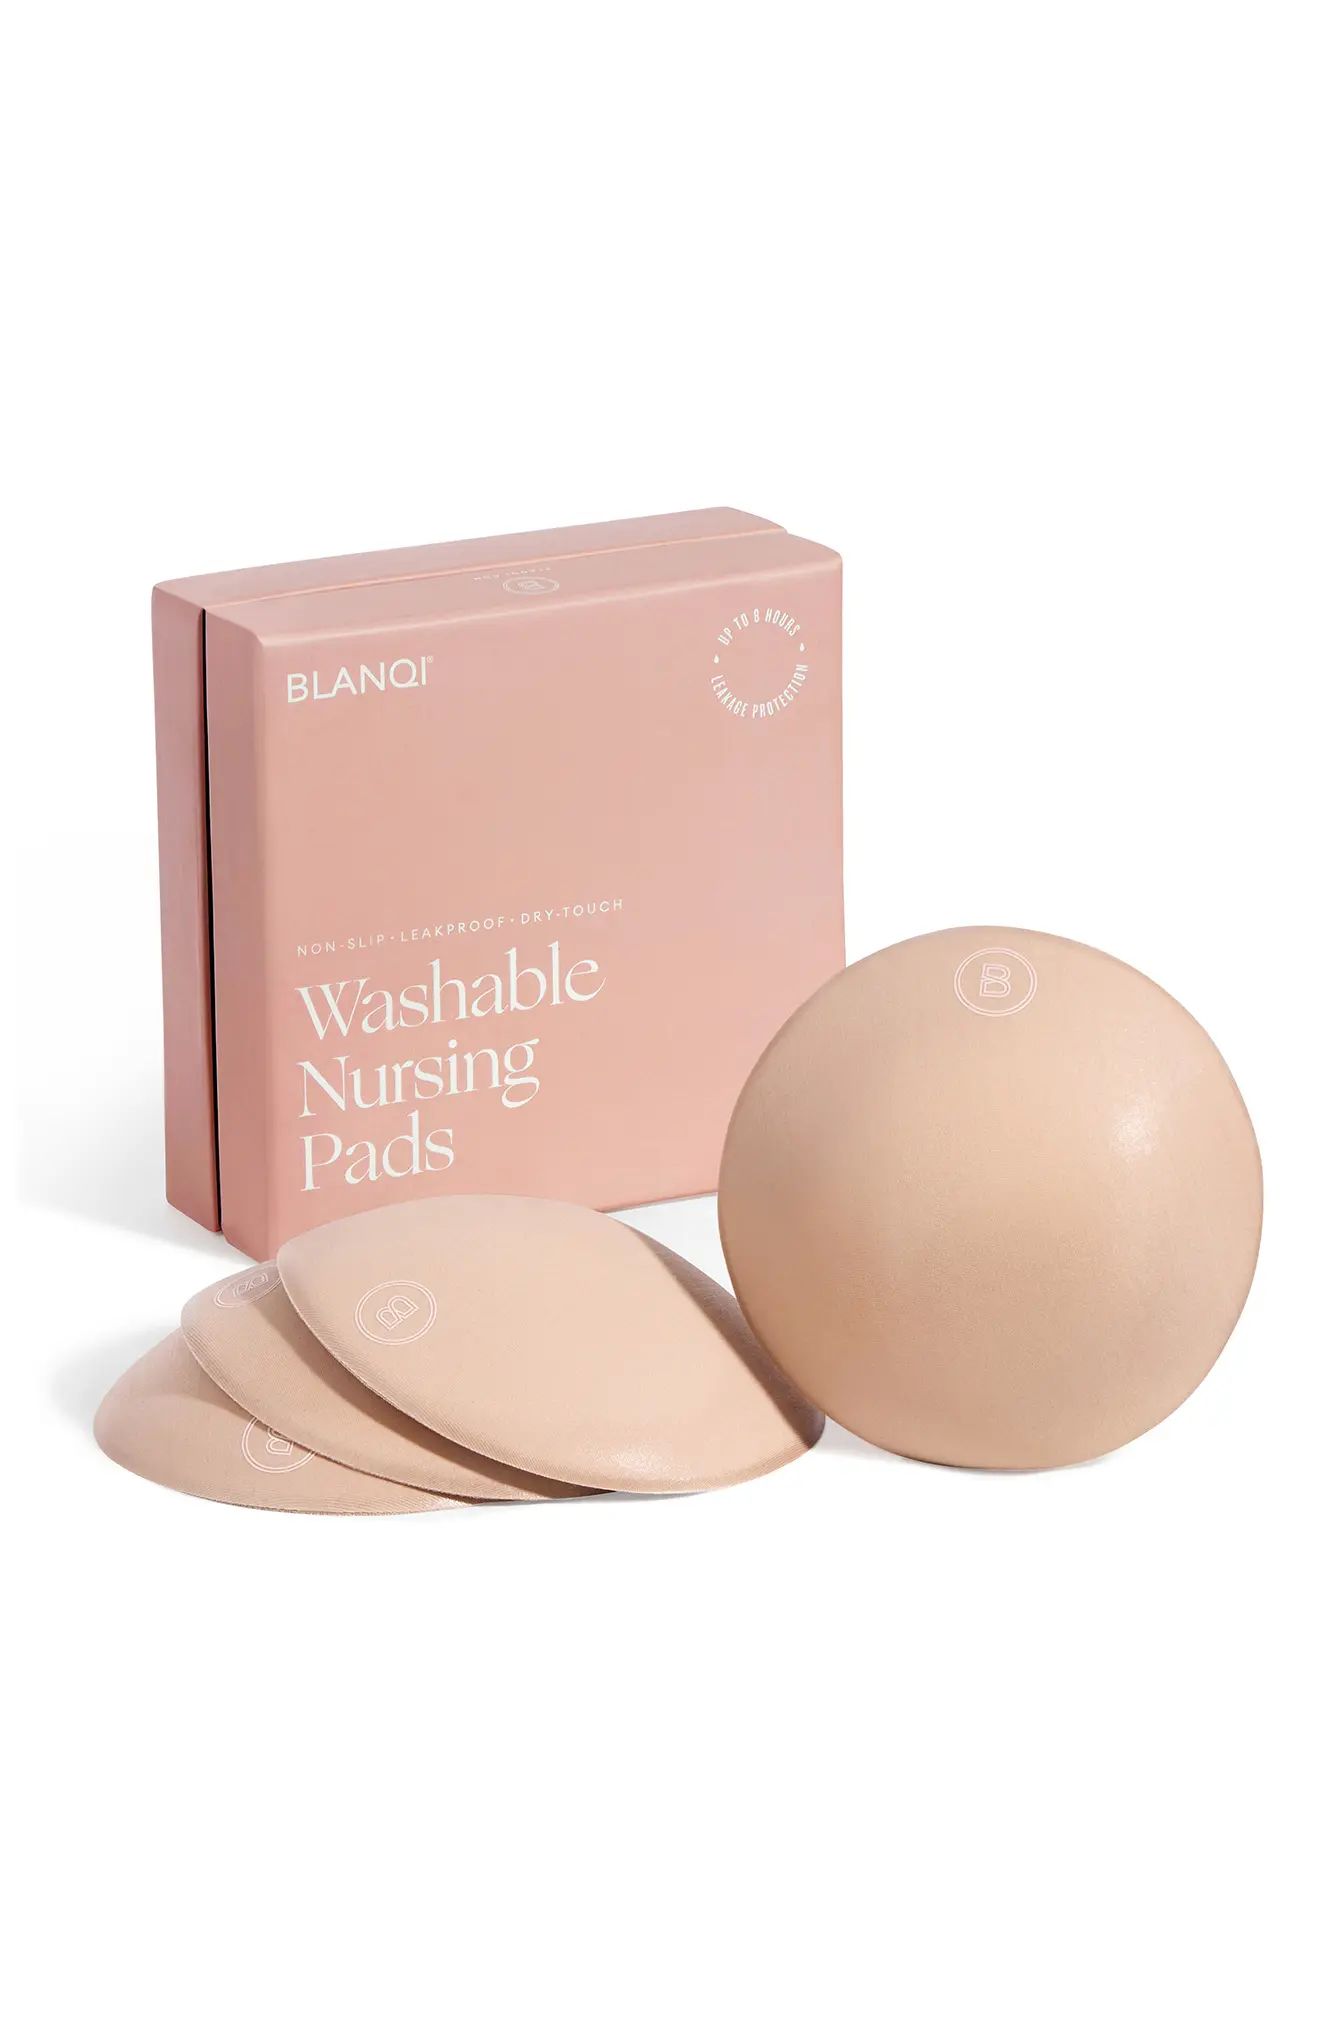 BLANQI Washsable Nursing Pads in Nude at Nordstrom | Nordstrom